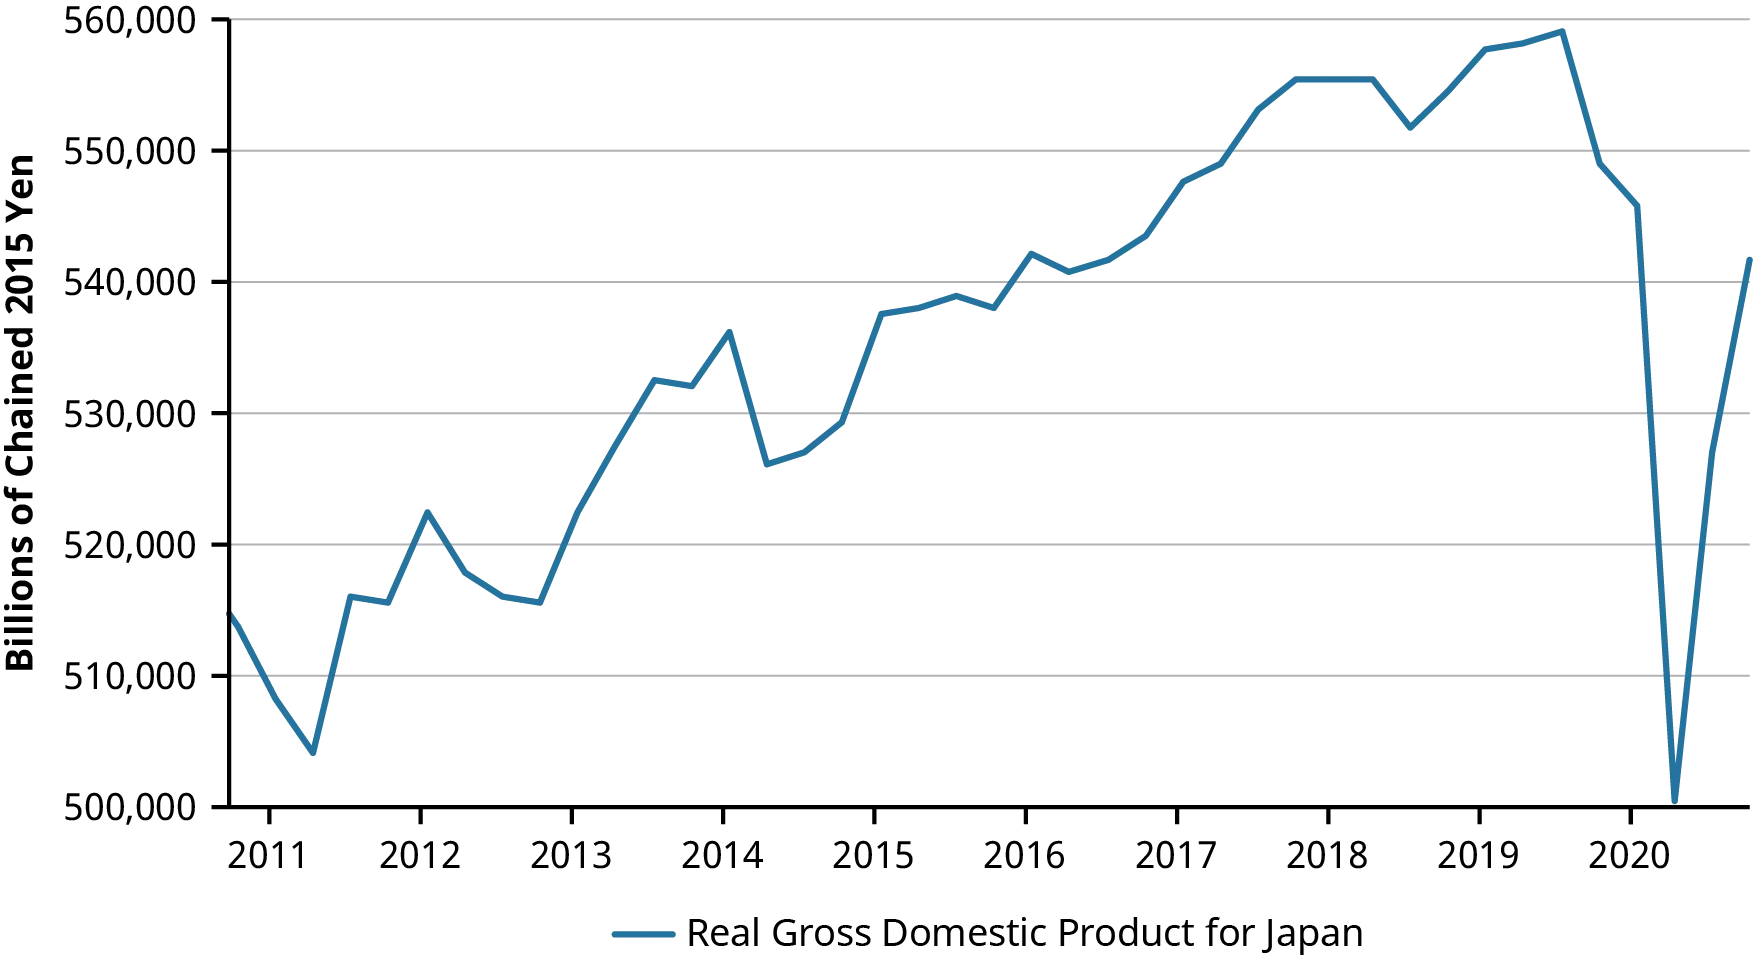 Graphical representation of the Real Gross Domestic Product for Japan, 2010–2020. It shows that the real GDP for Japan kept on rising from 2011 to 2019, then dropped dramatically in 2020 before it dramatically rose again.